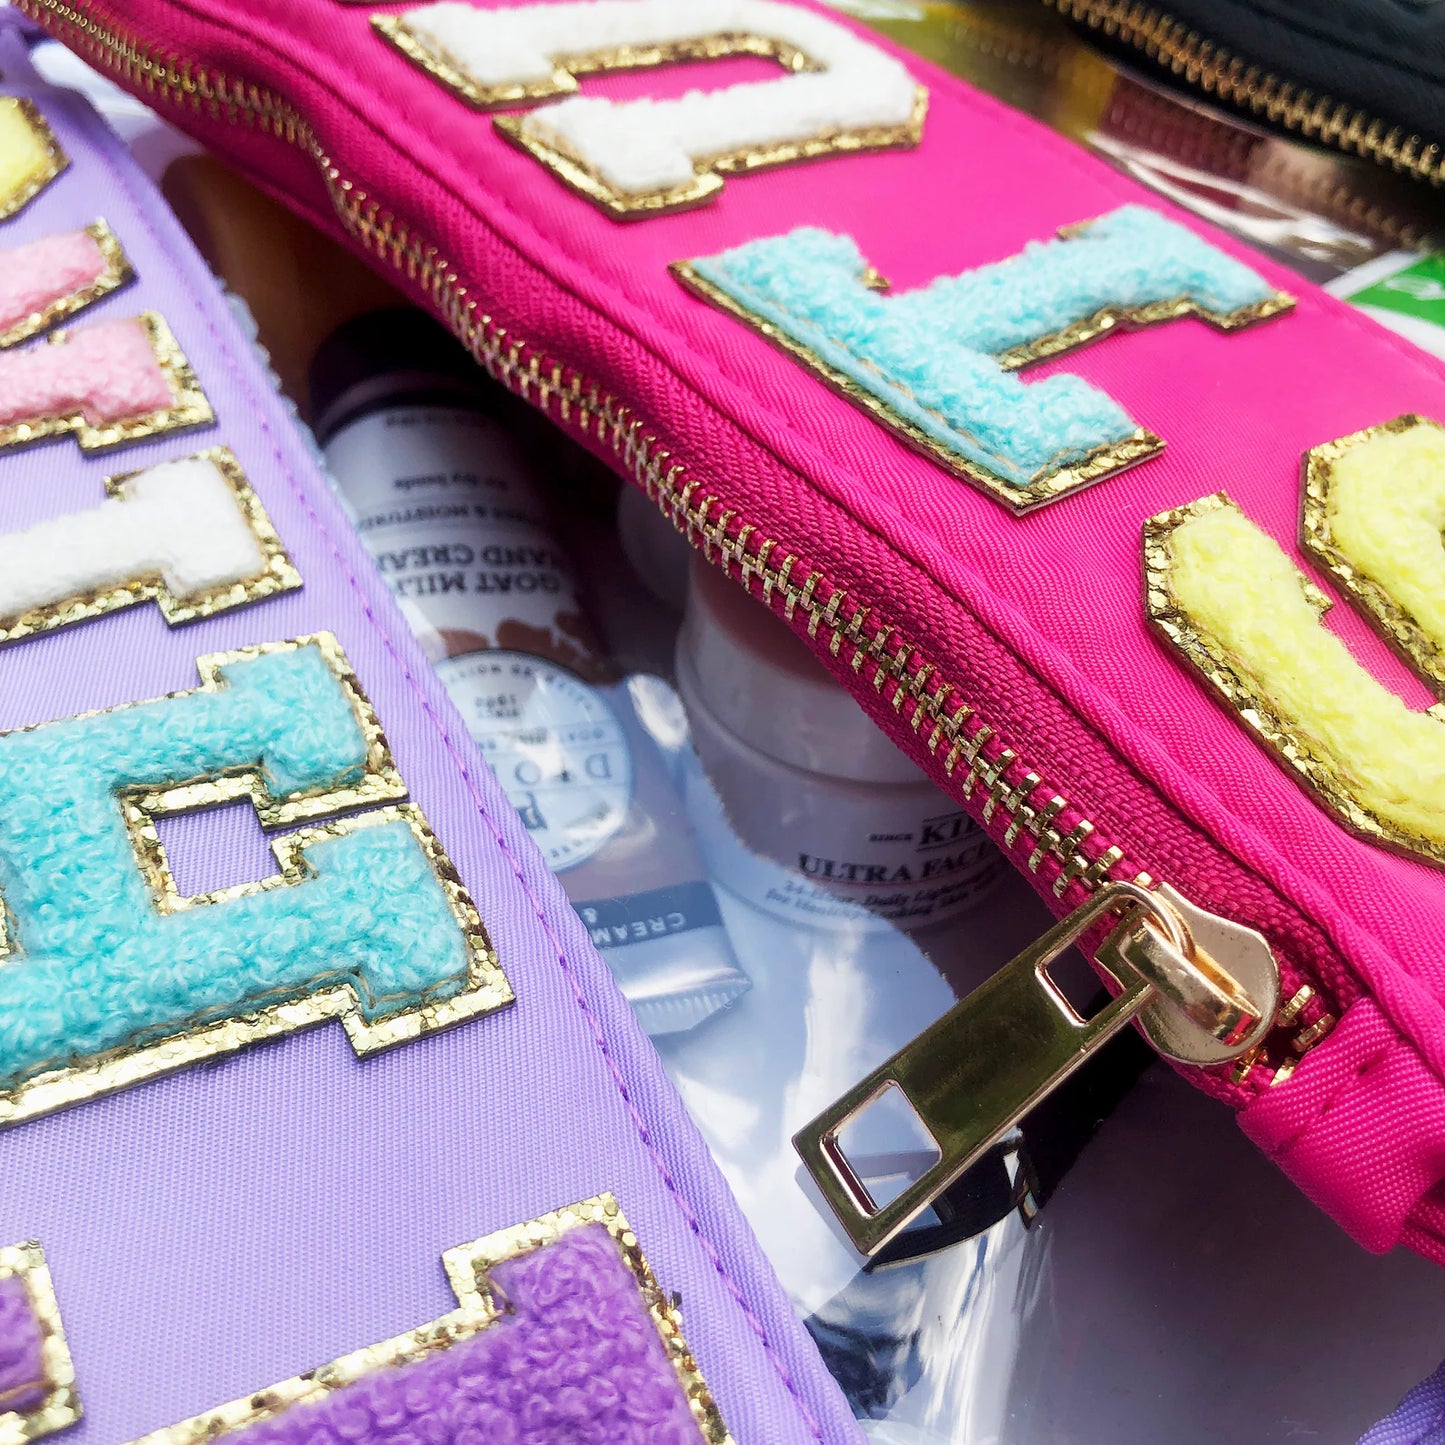 Customized Letter Patch Clear Zippered Pouch Bag